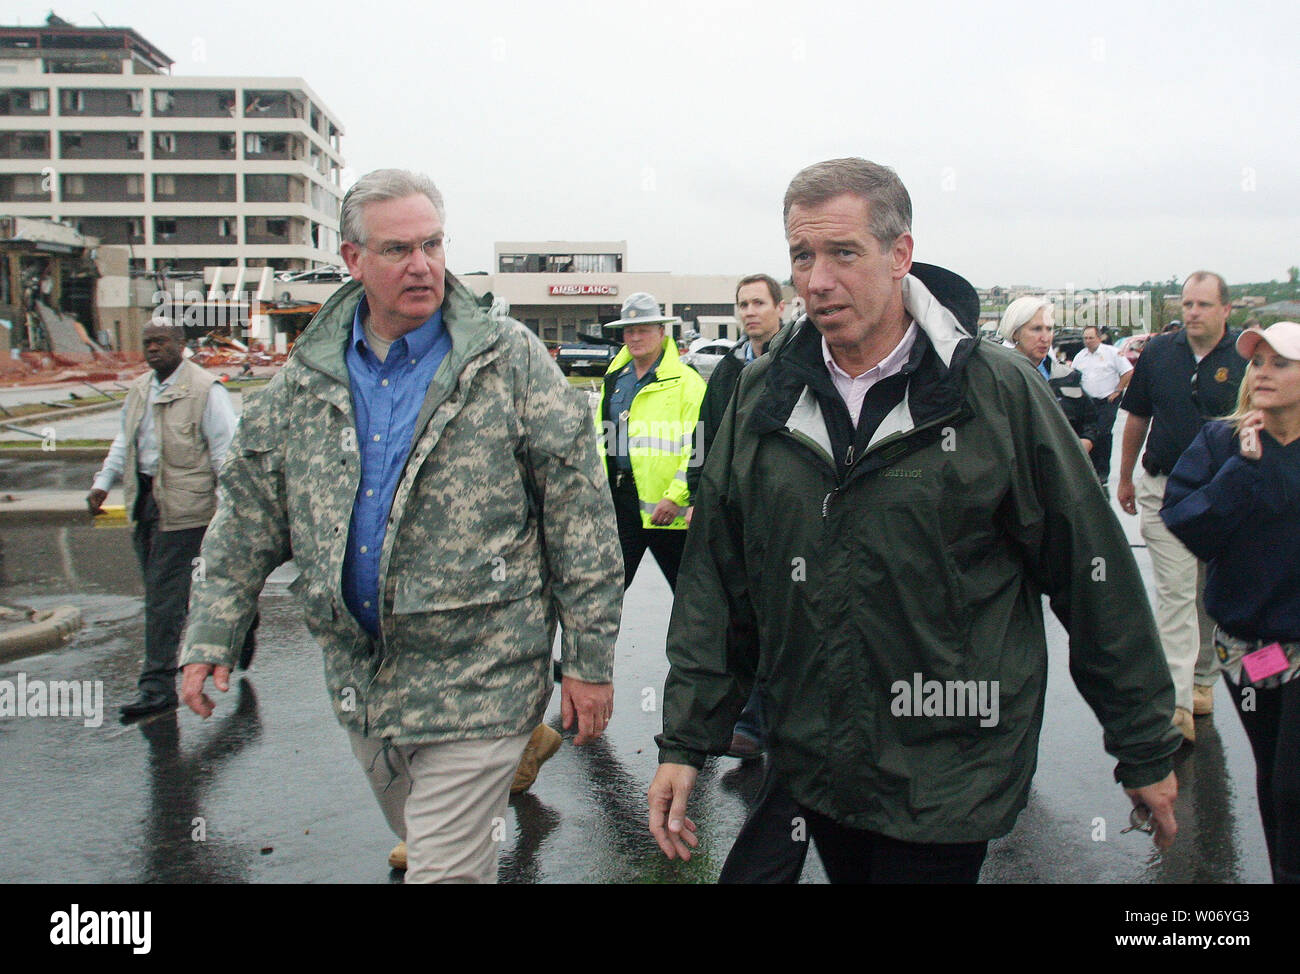 Missouri Governor Jay Nixon (L)  takes a walking tour of tornado damaged Jopin, Missouri with NBC's Brian Williams on May 22, 2011. Officials say the tornado cut a path a mile wide by four miles on May 22, destroying over 2000 homes and businesses, including the hospital and claiming 116 lives so far. Williams once lived in the southwestern Missouri town. UPI/Tom Uhlenbrock Stock Photo